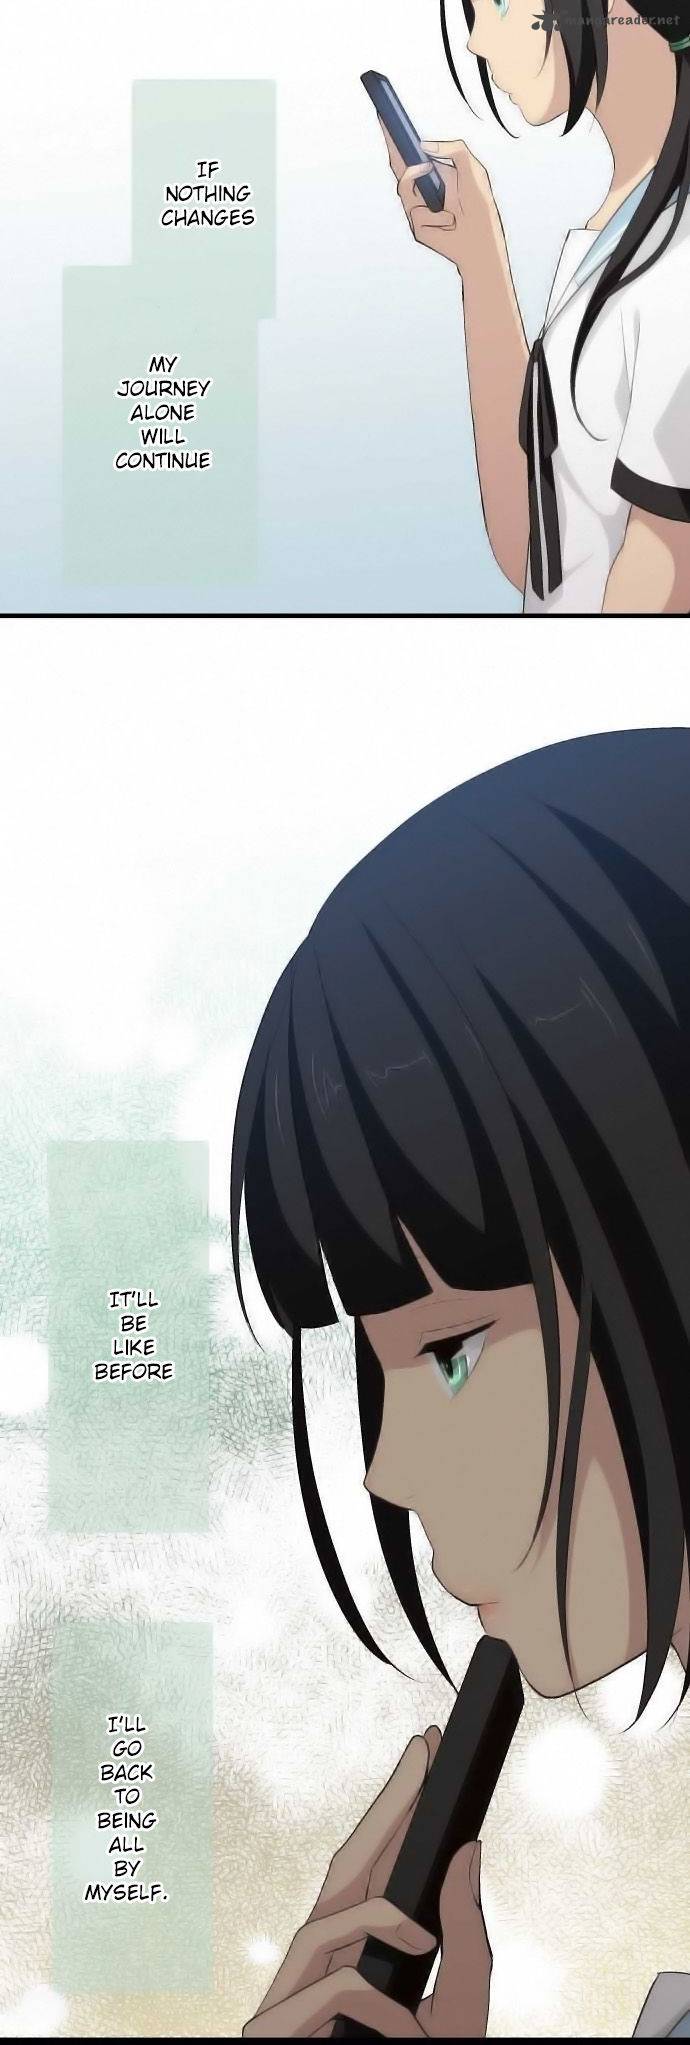 Relife 69 14